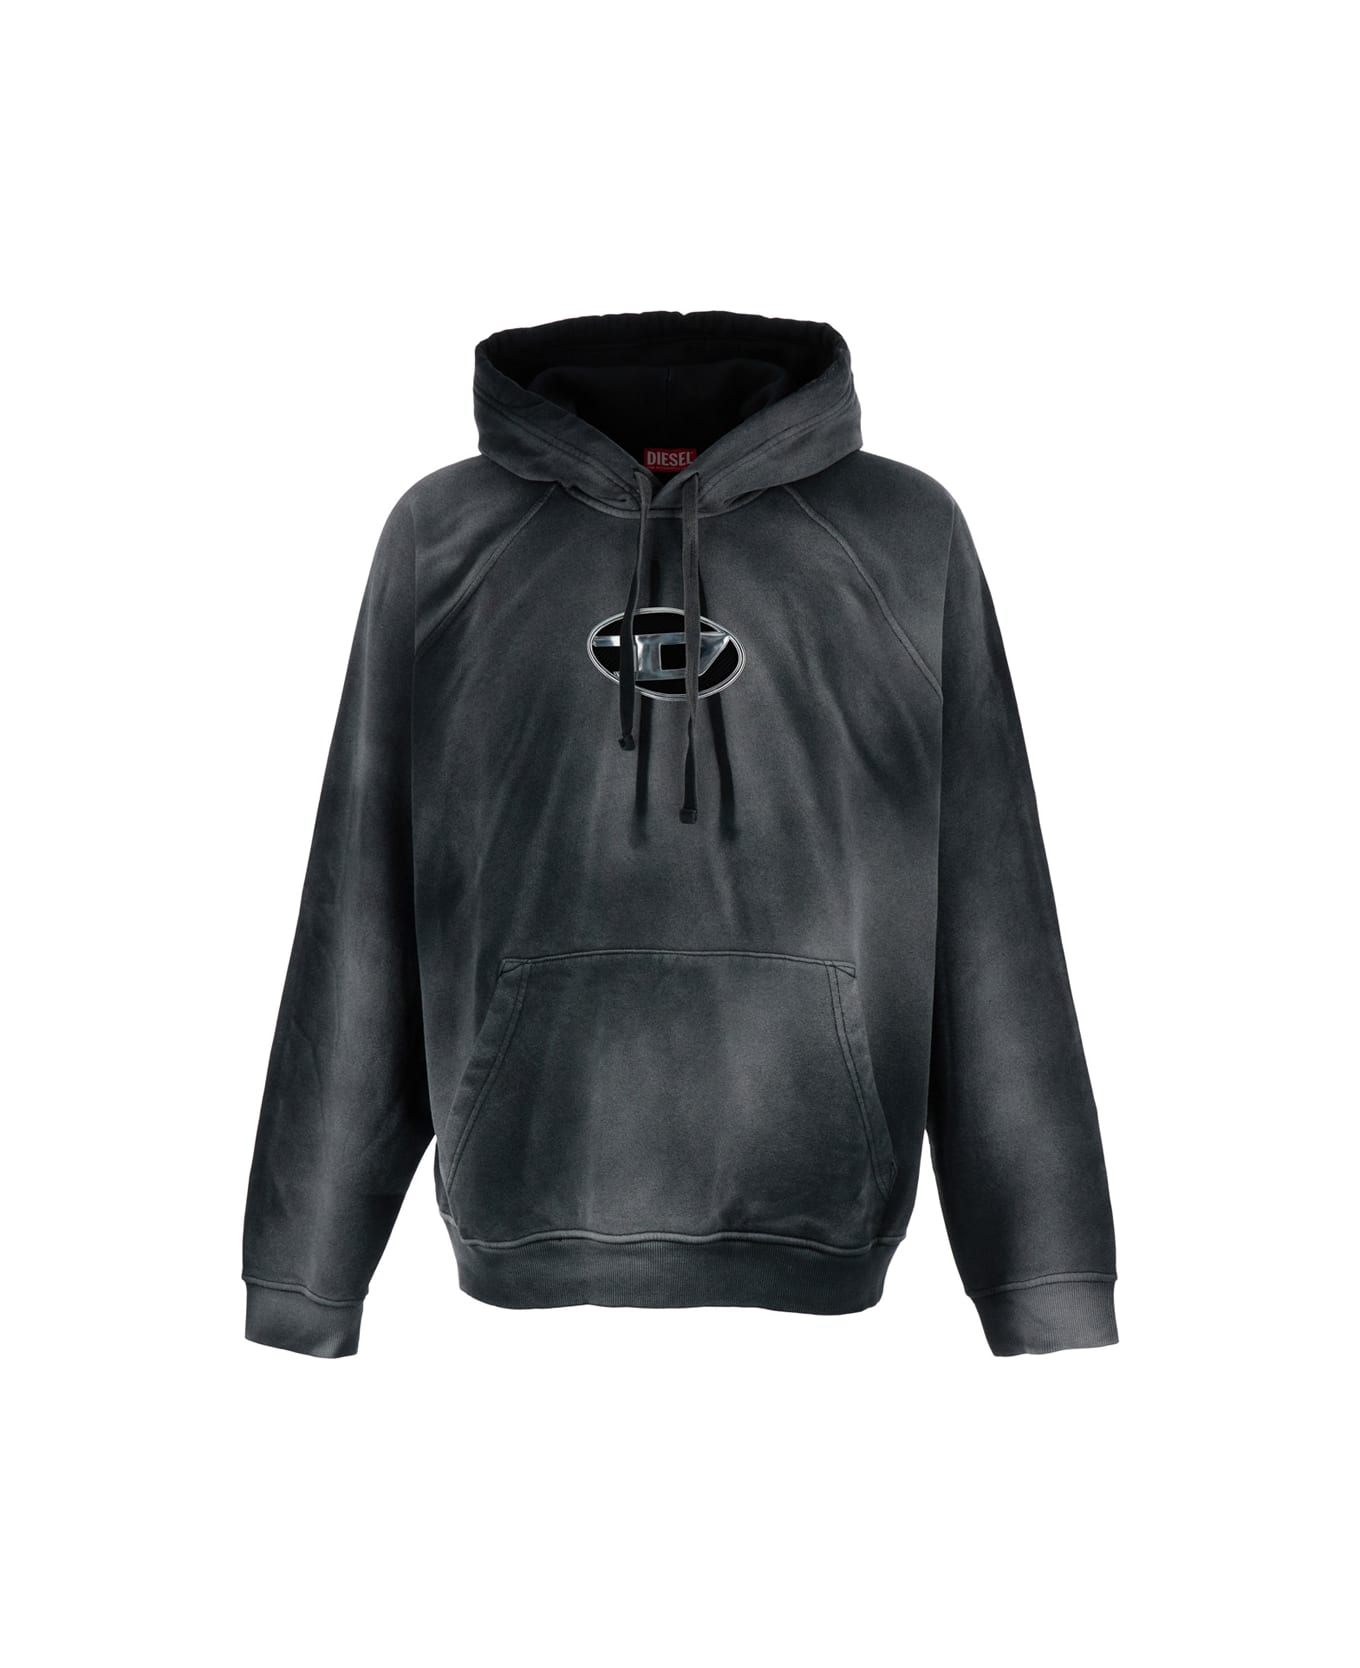 Diesel Black Hoodie With Cut Out Oval D Logo In Cotton Man - Black フリース